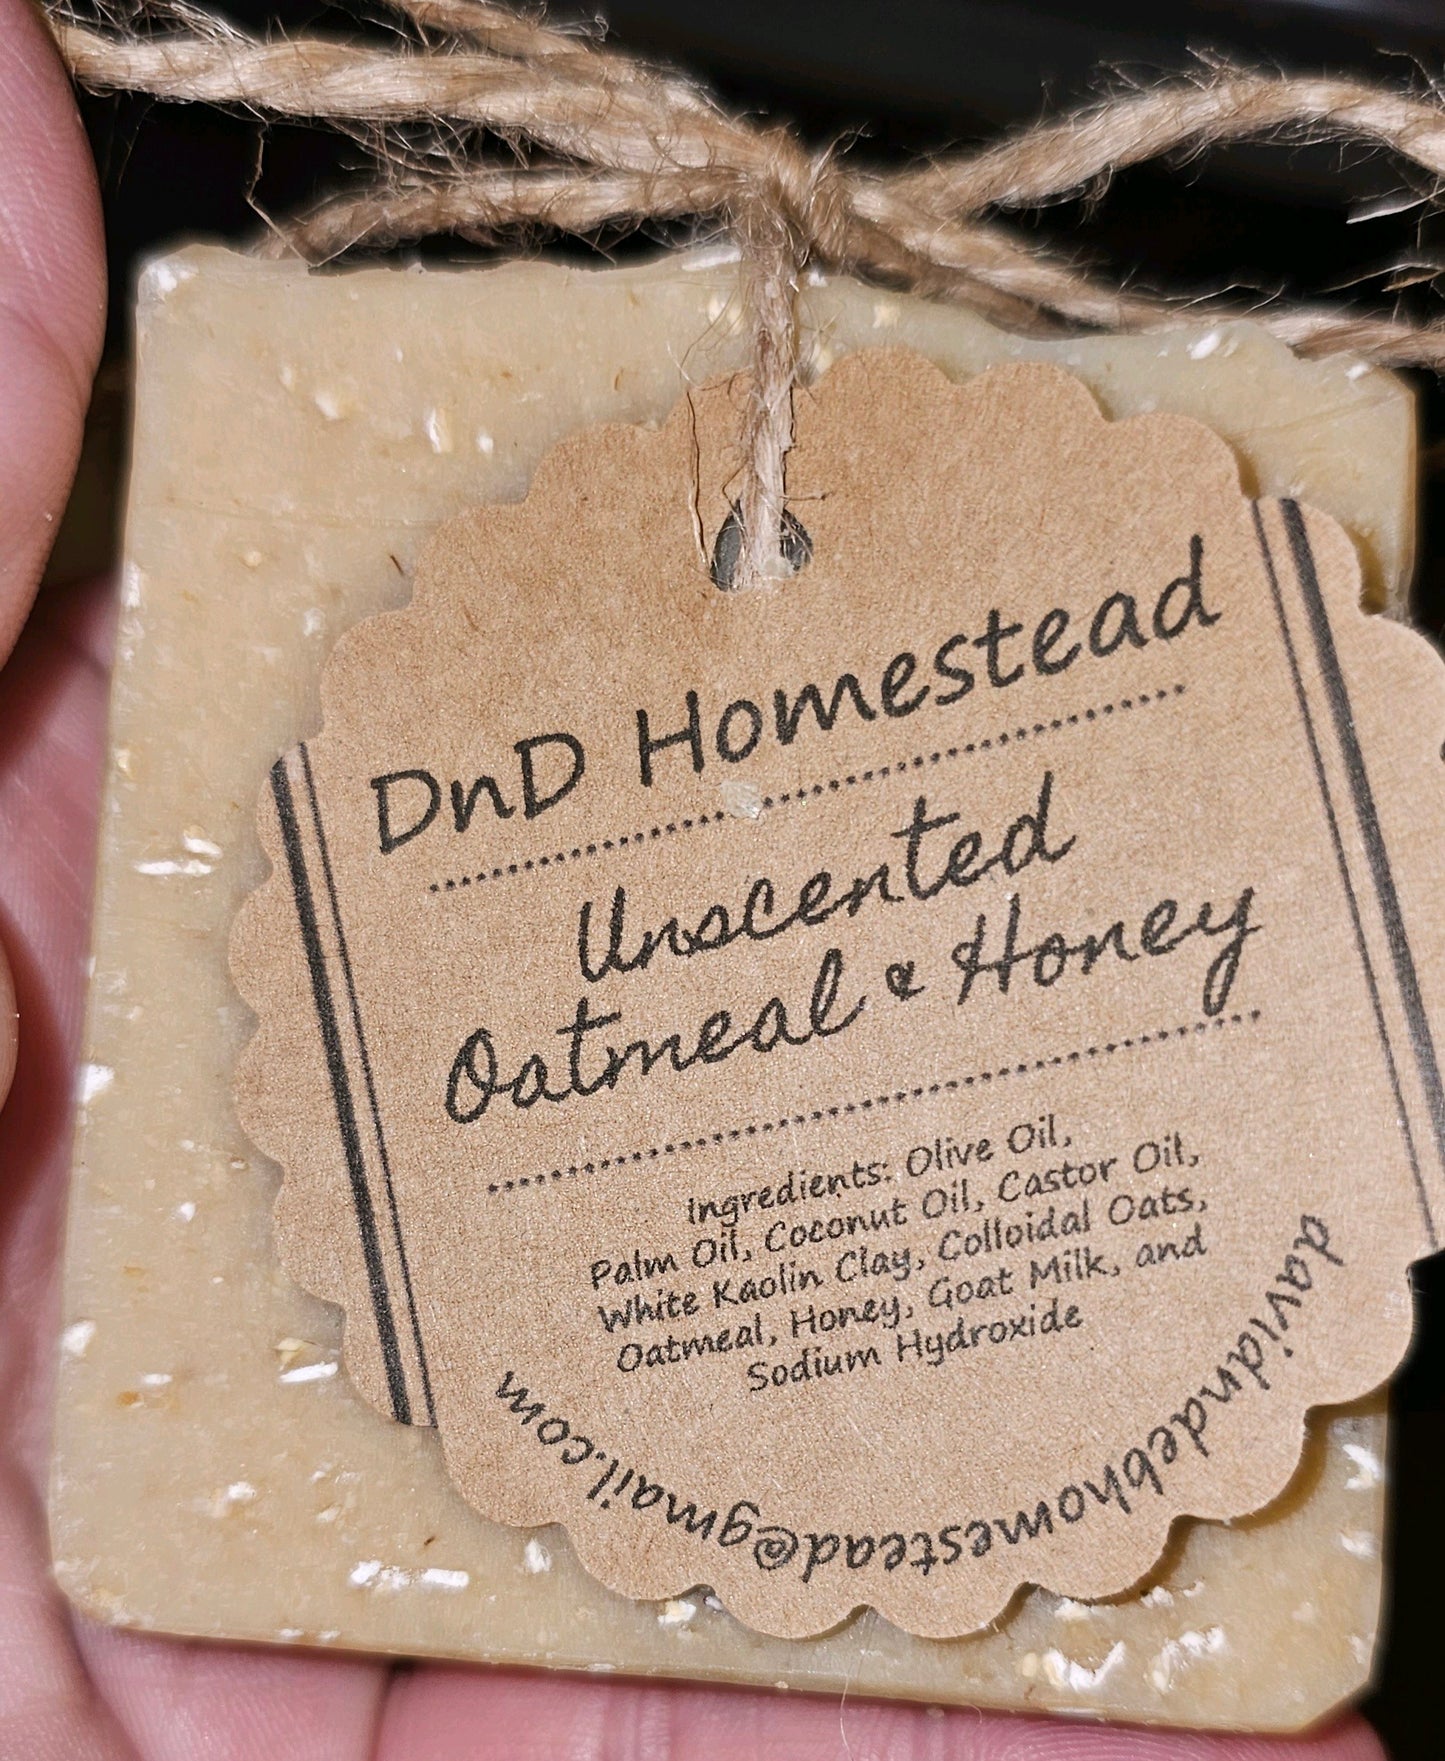 Unscented Oatmeal and Honey Goat Milk Soap